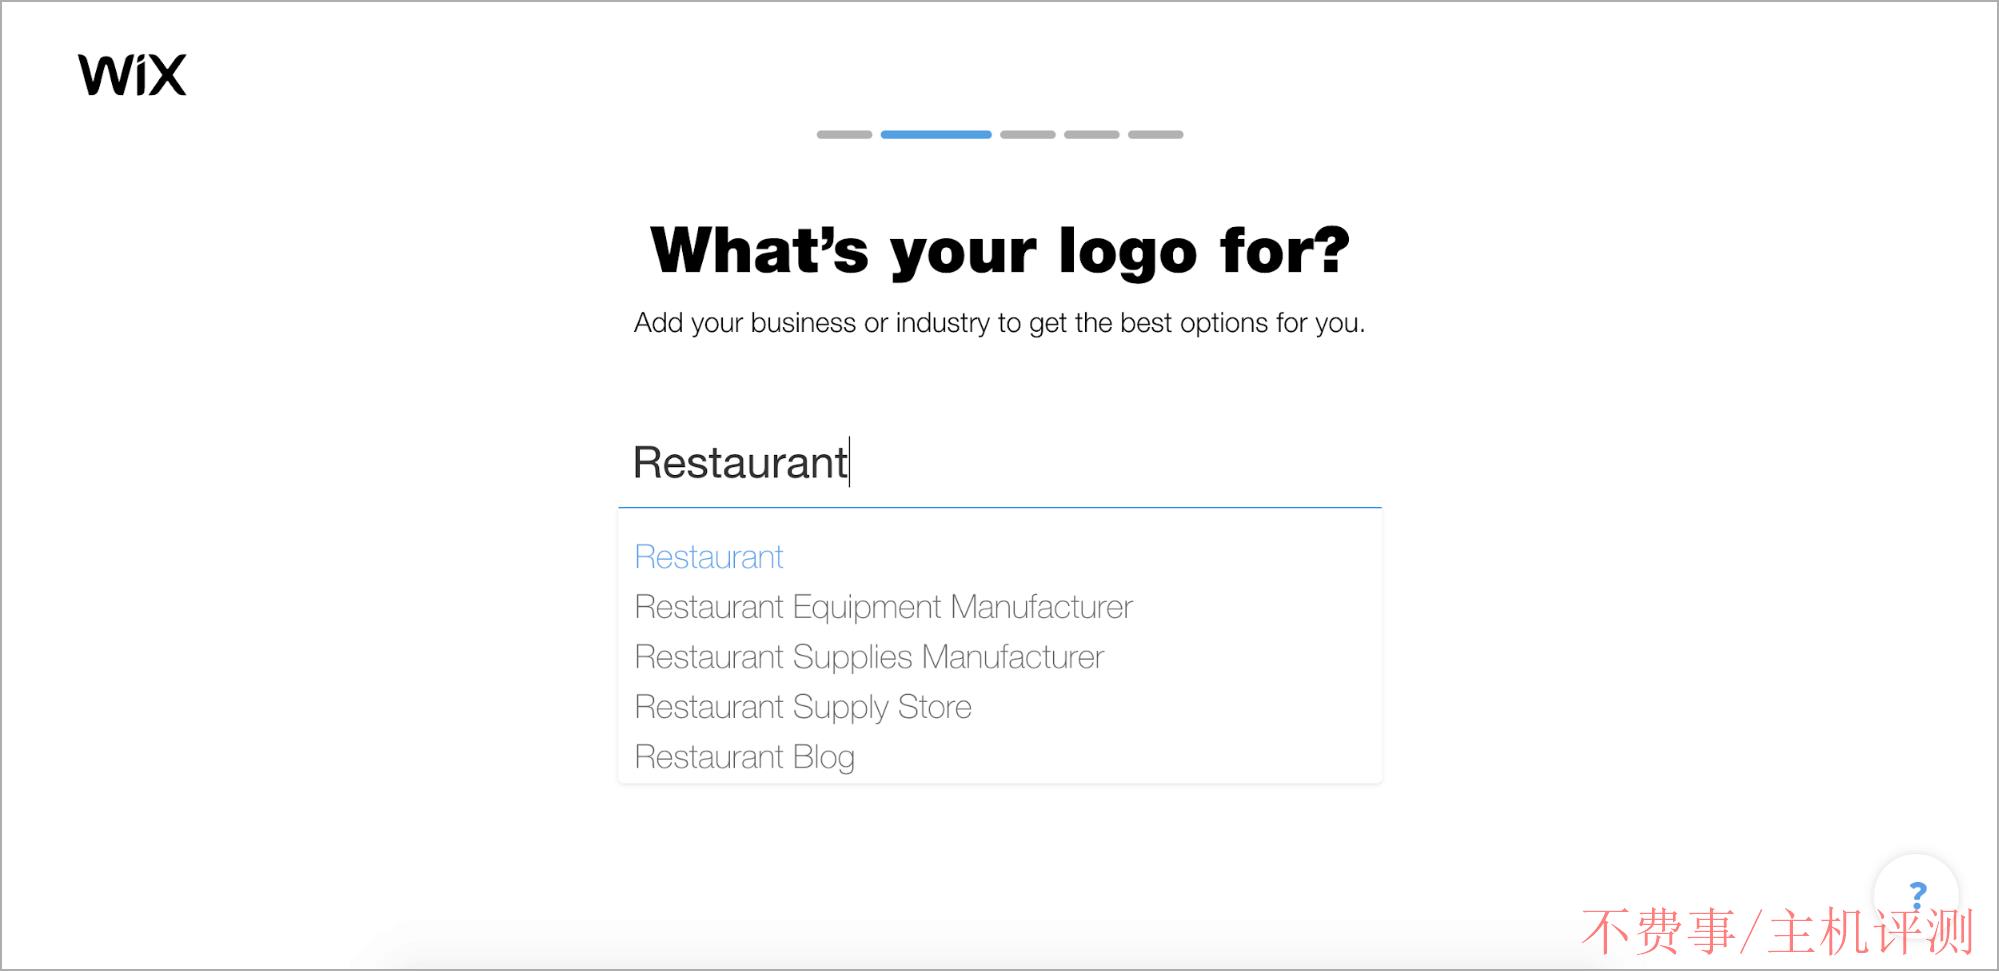 Wix Logo Maker screenshot - What's your logo for?